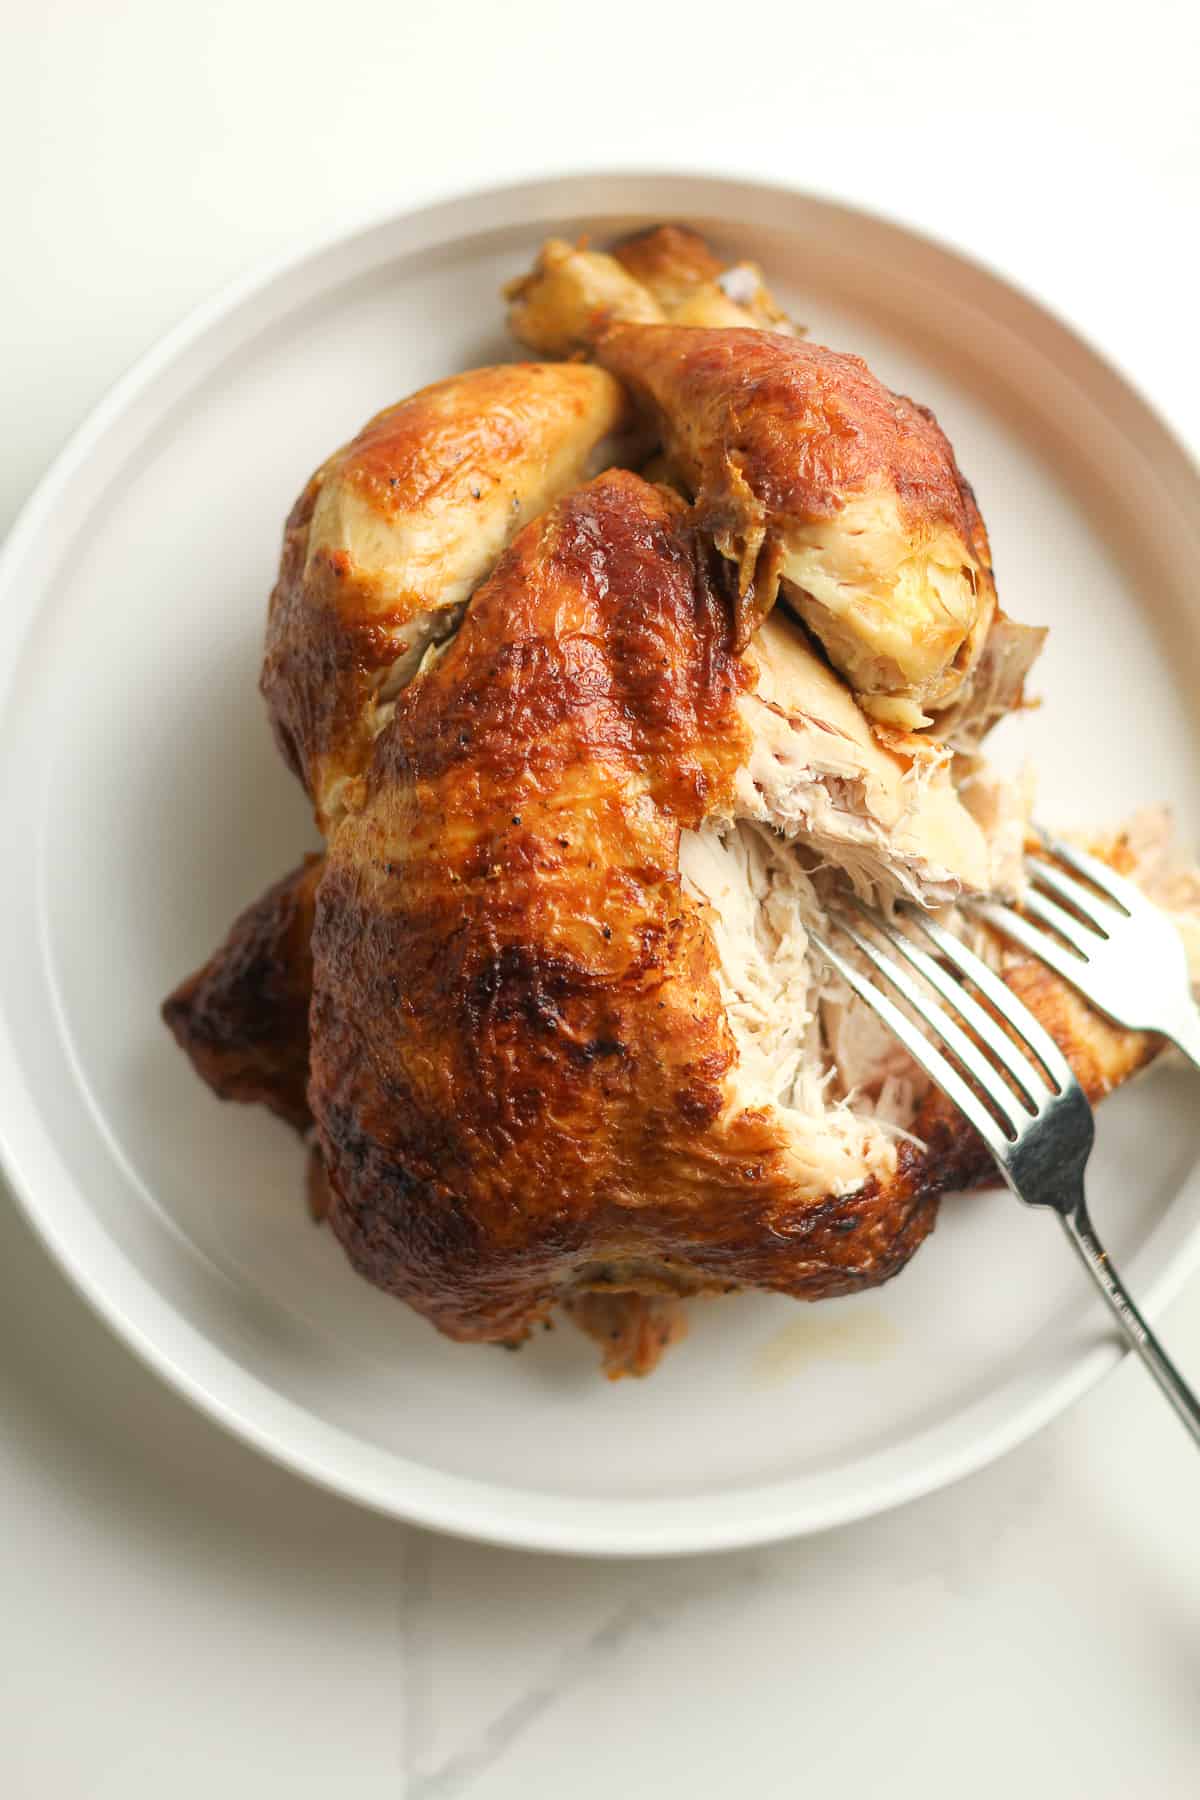 A plate of a rotisserie chicken with two forks.